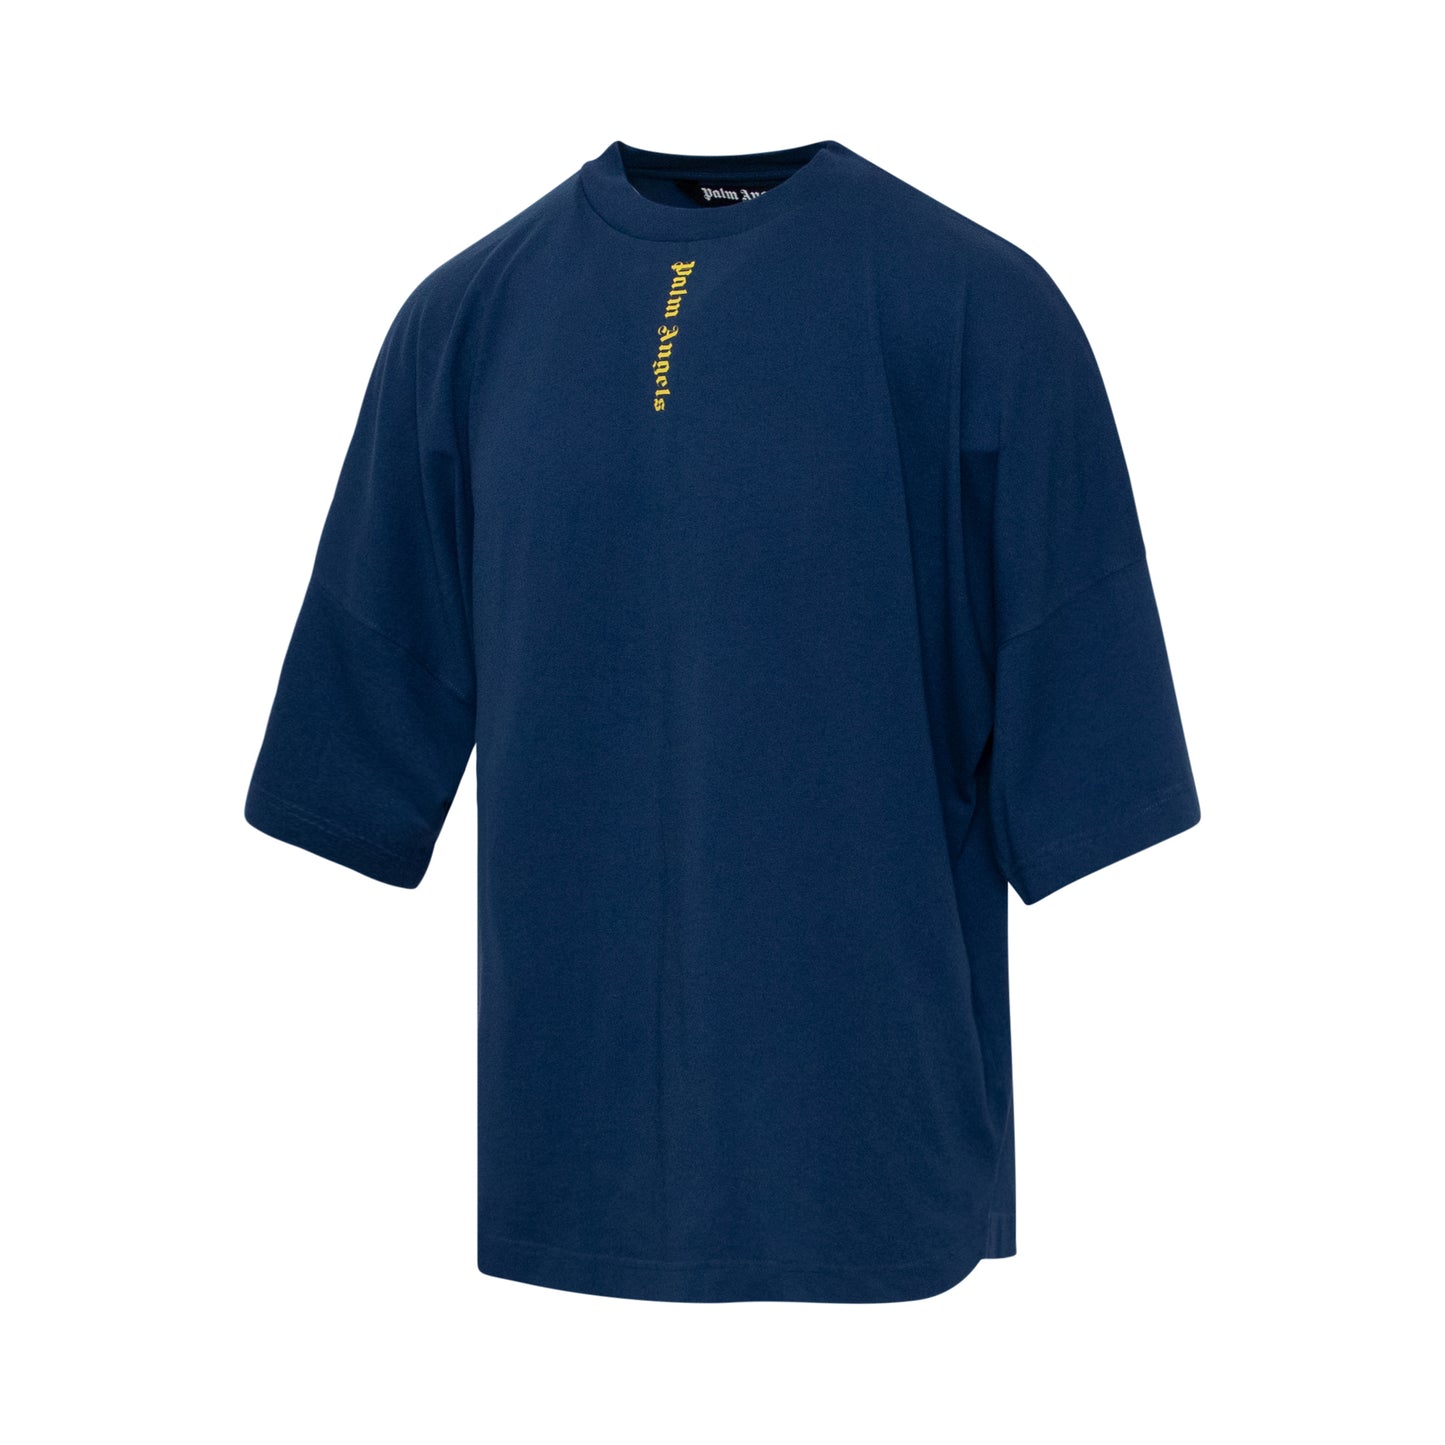 Ns Logo Over T-Shirt in Navy Blue